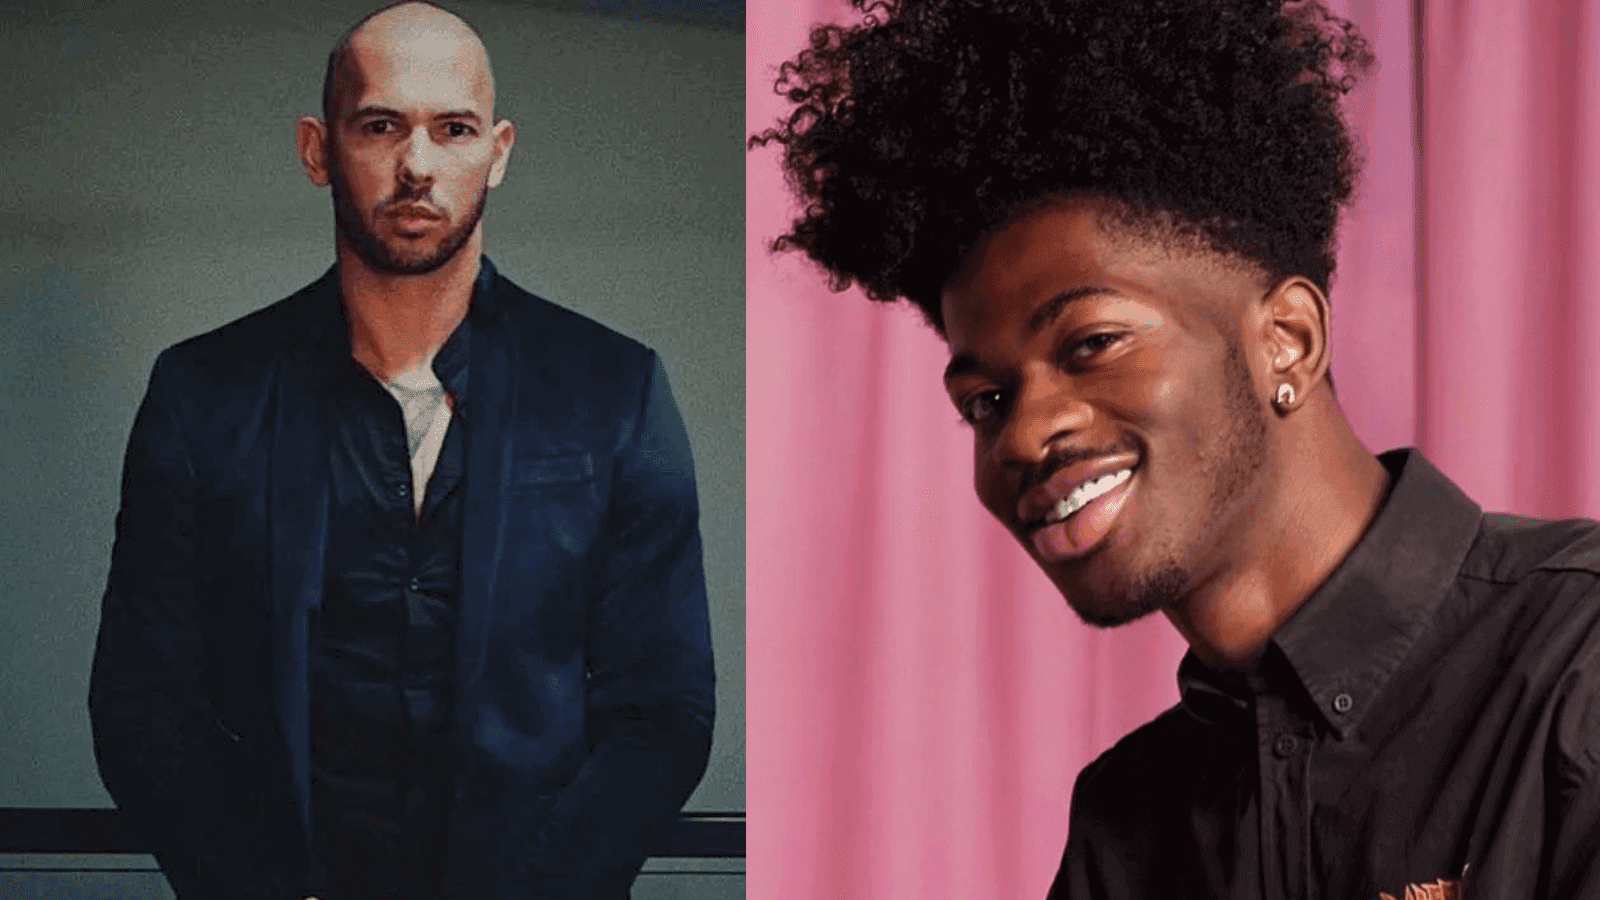 Lil Nas X Responds to Fans Comparing Him to Andrew Tate After Trans Tweet